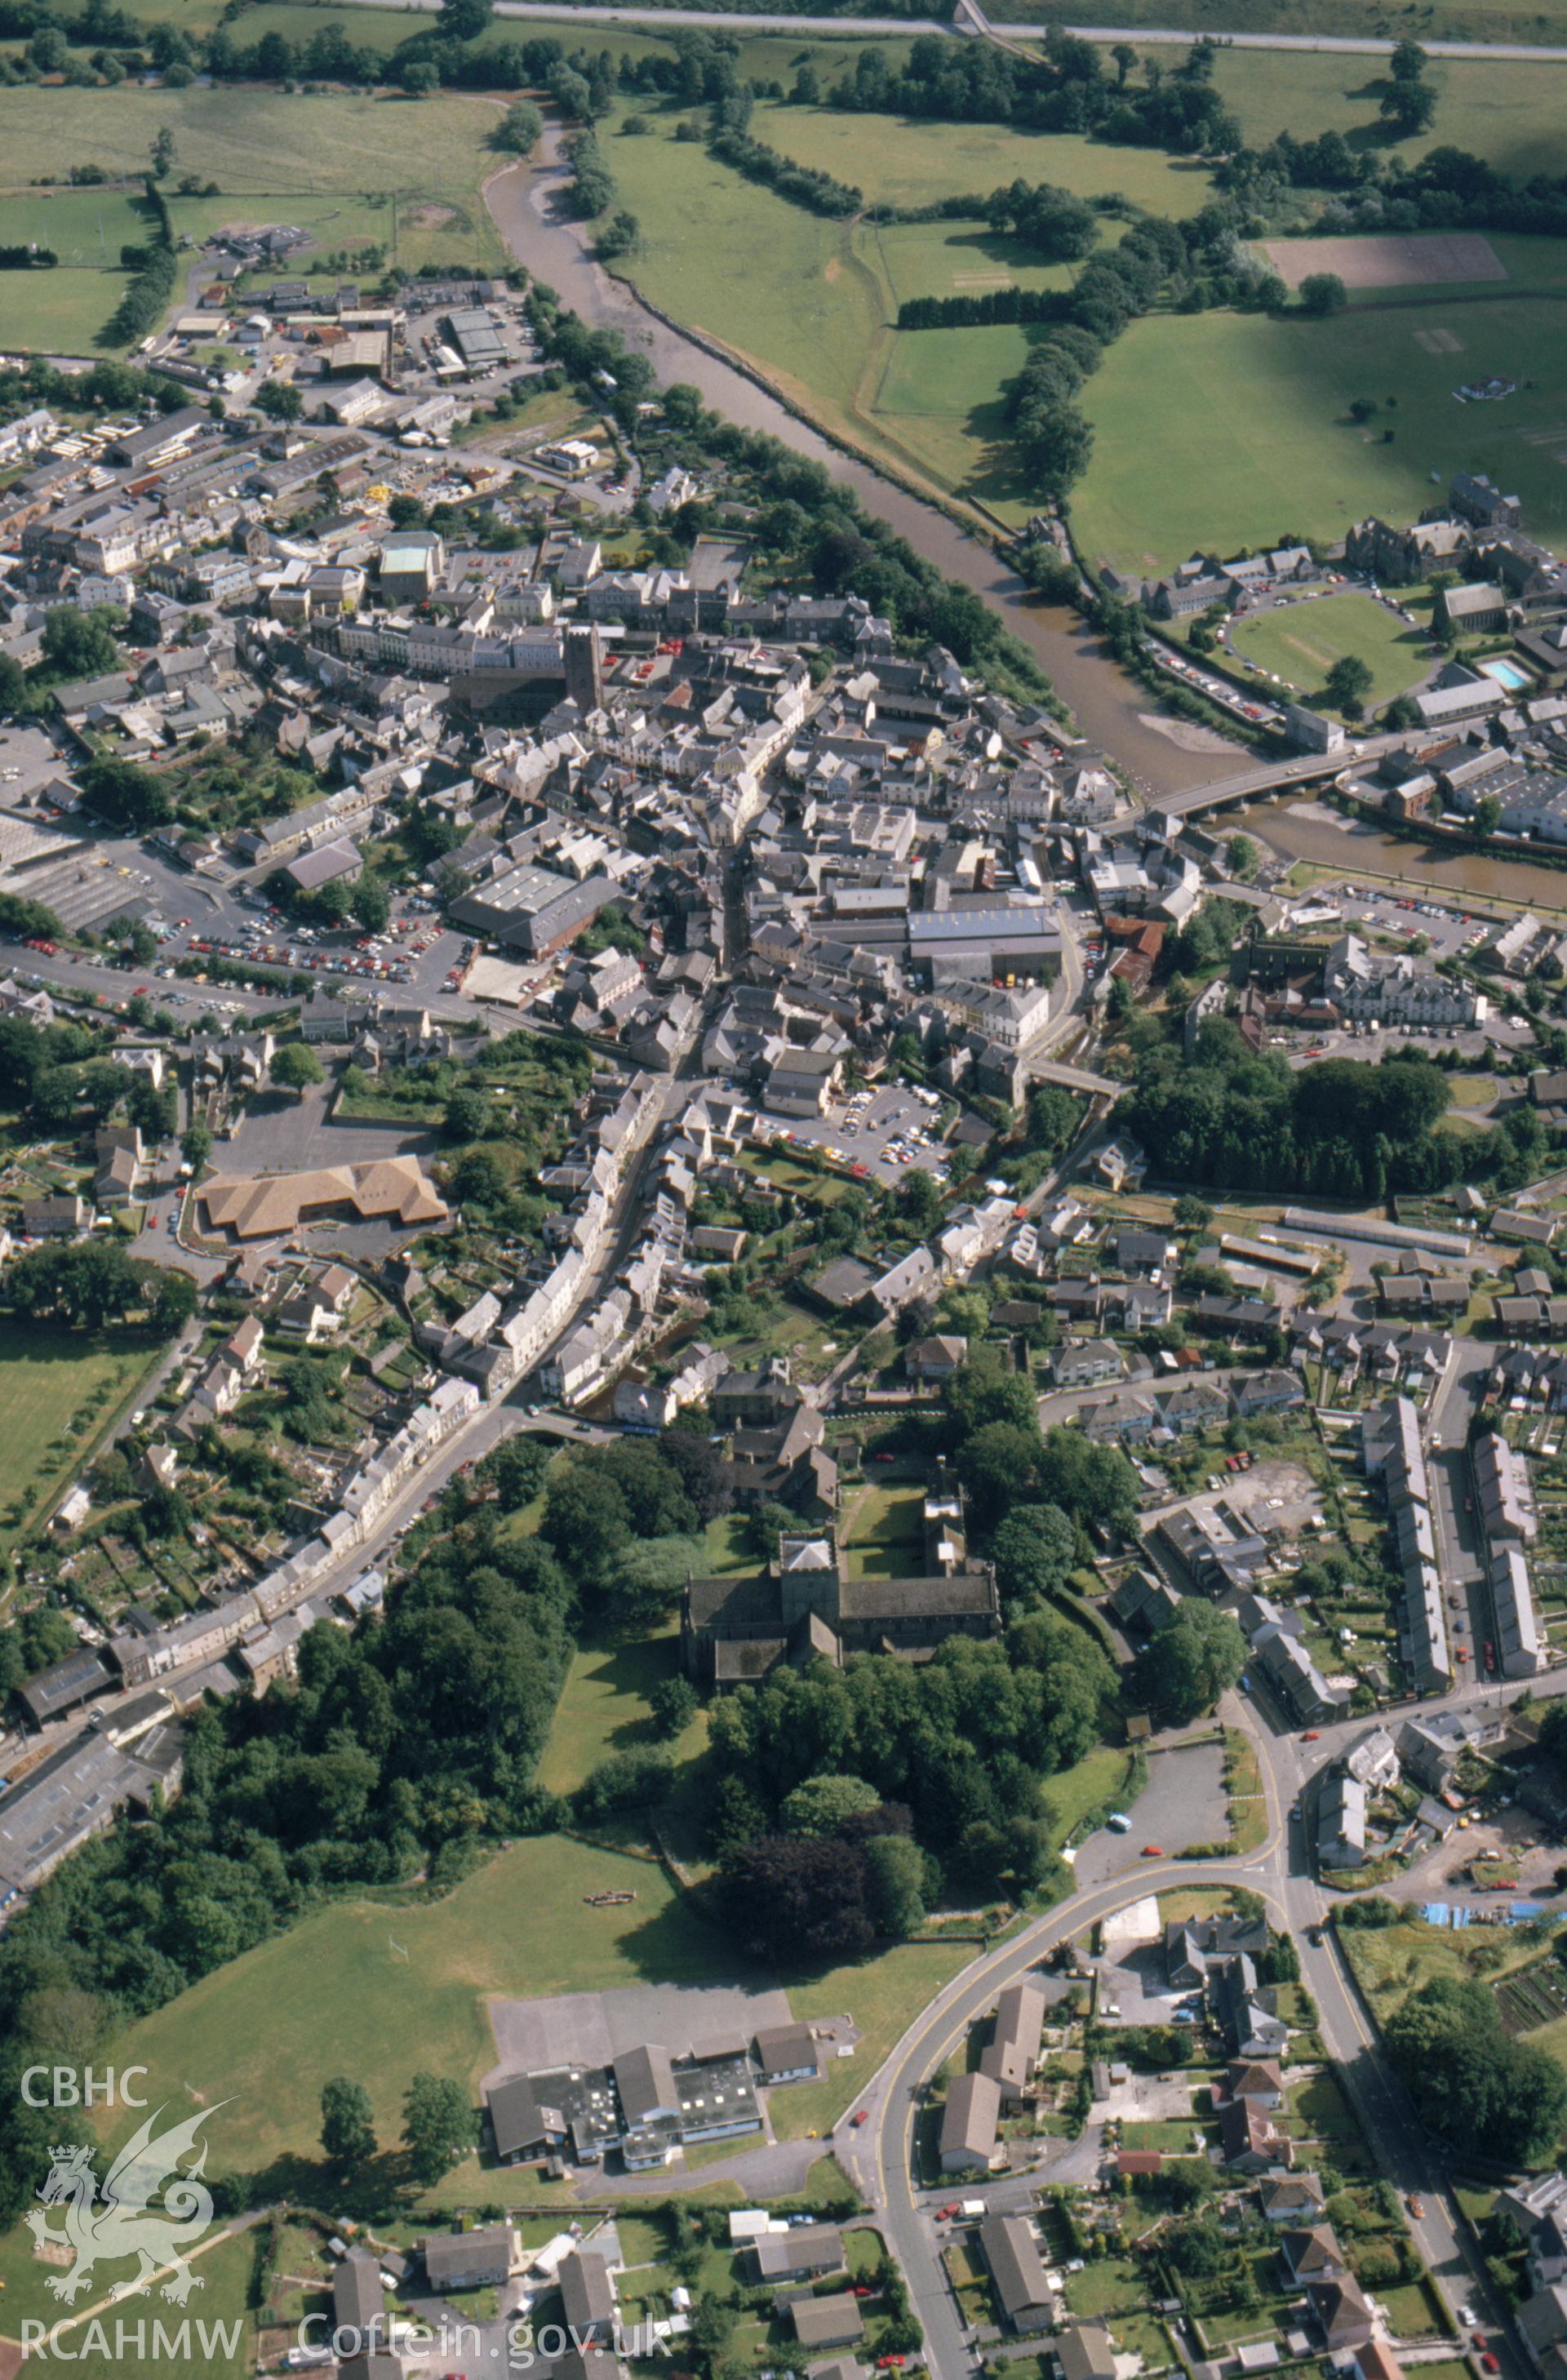 Slide of RCAHMW colour oblique aerial photograph of aerial view of Brecon Town, taken by C.R. Musson, 1989.